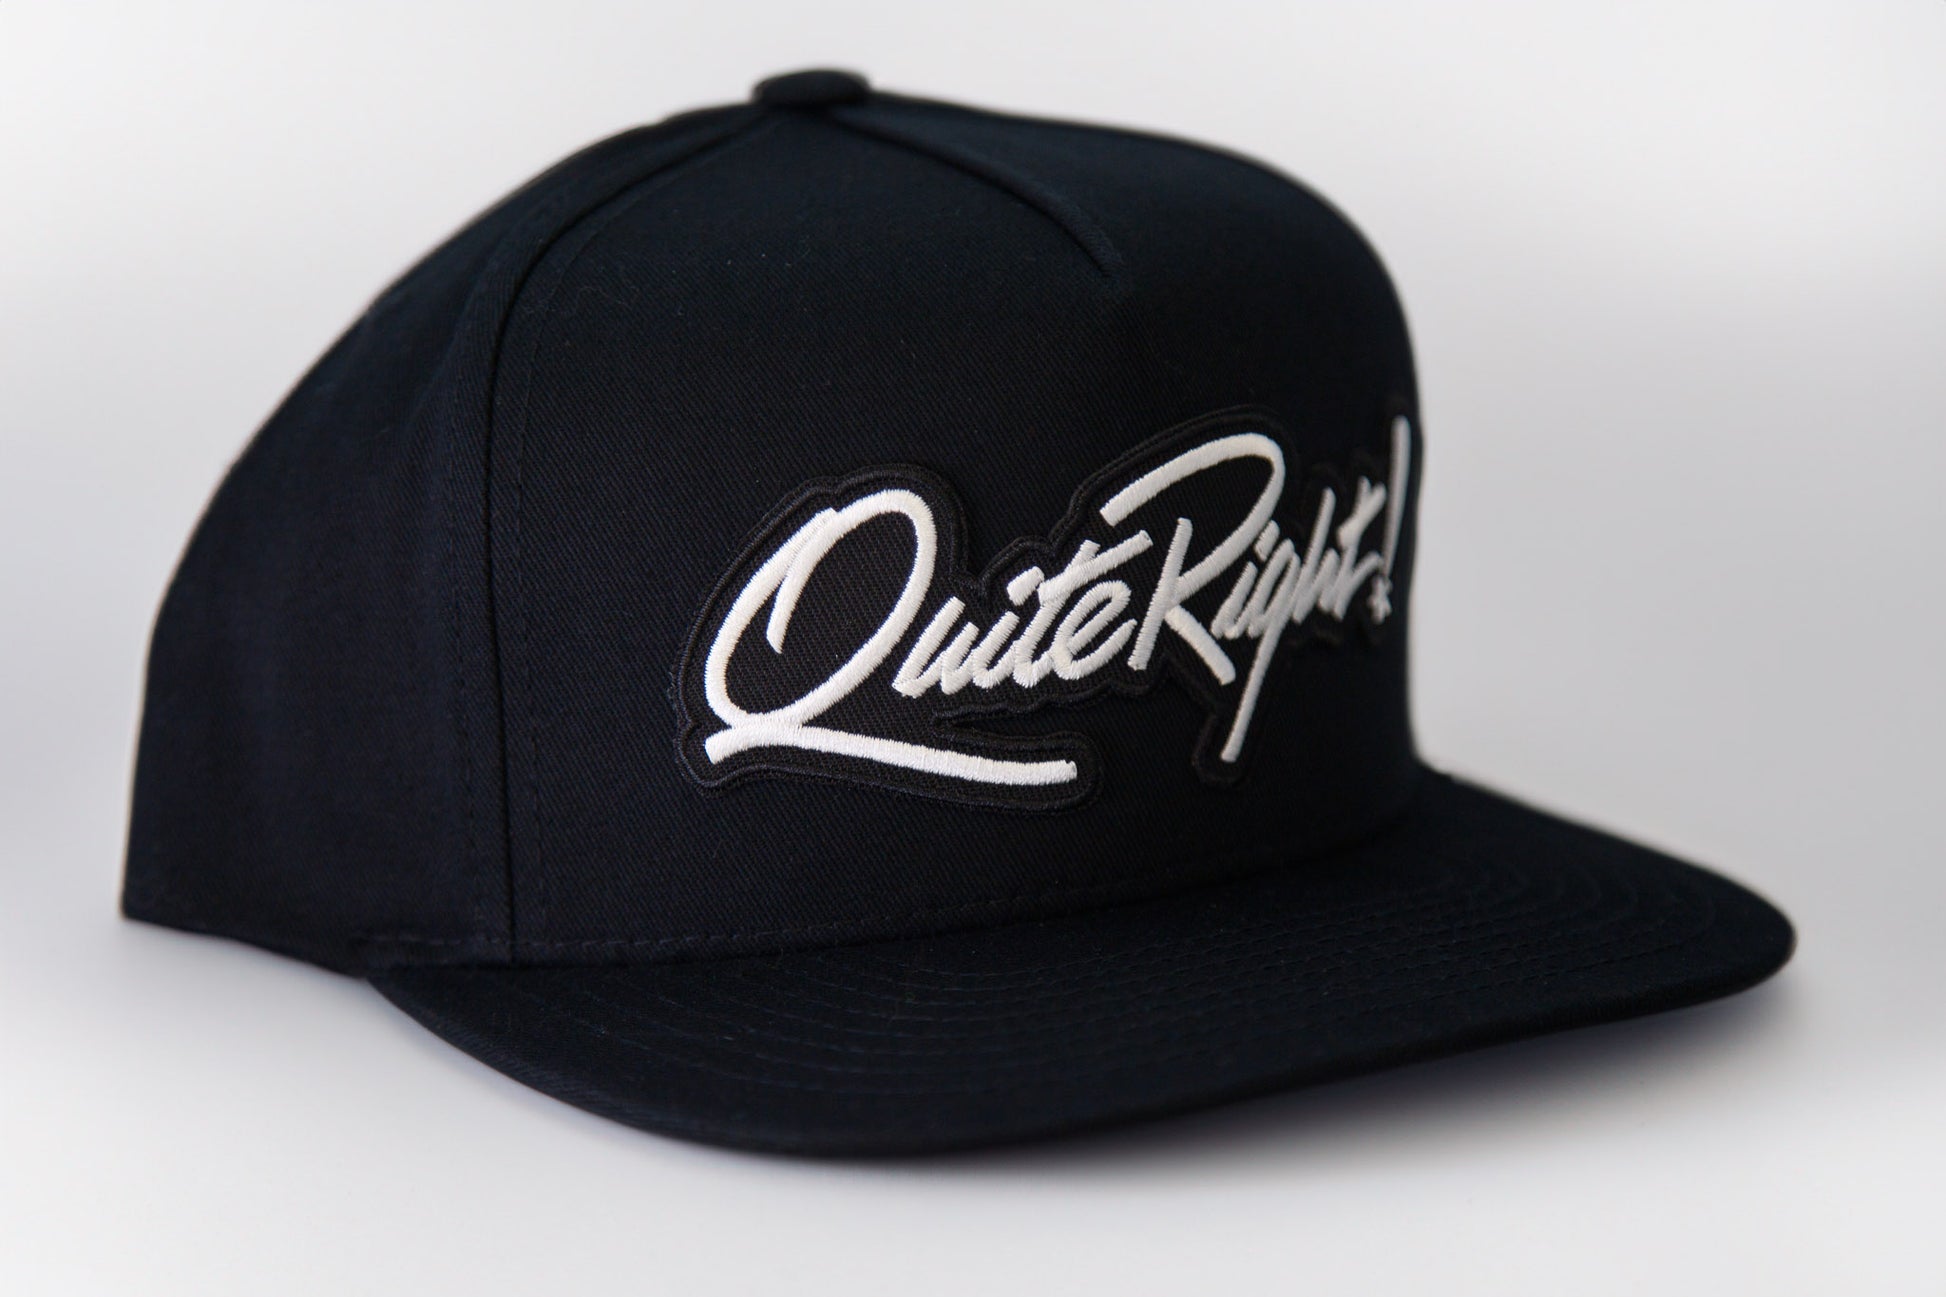 Quite Right Records Black Snapback hat with script patch